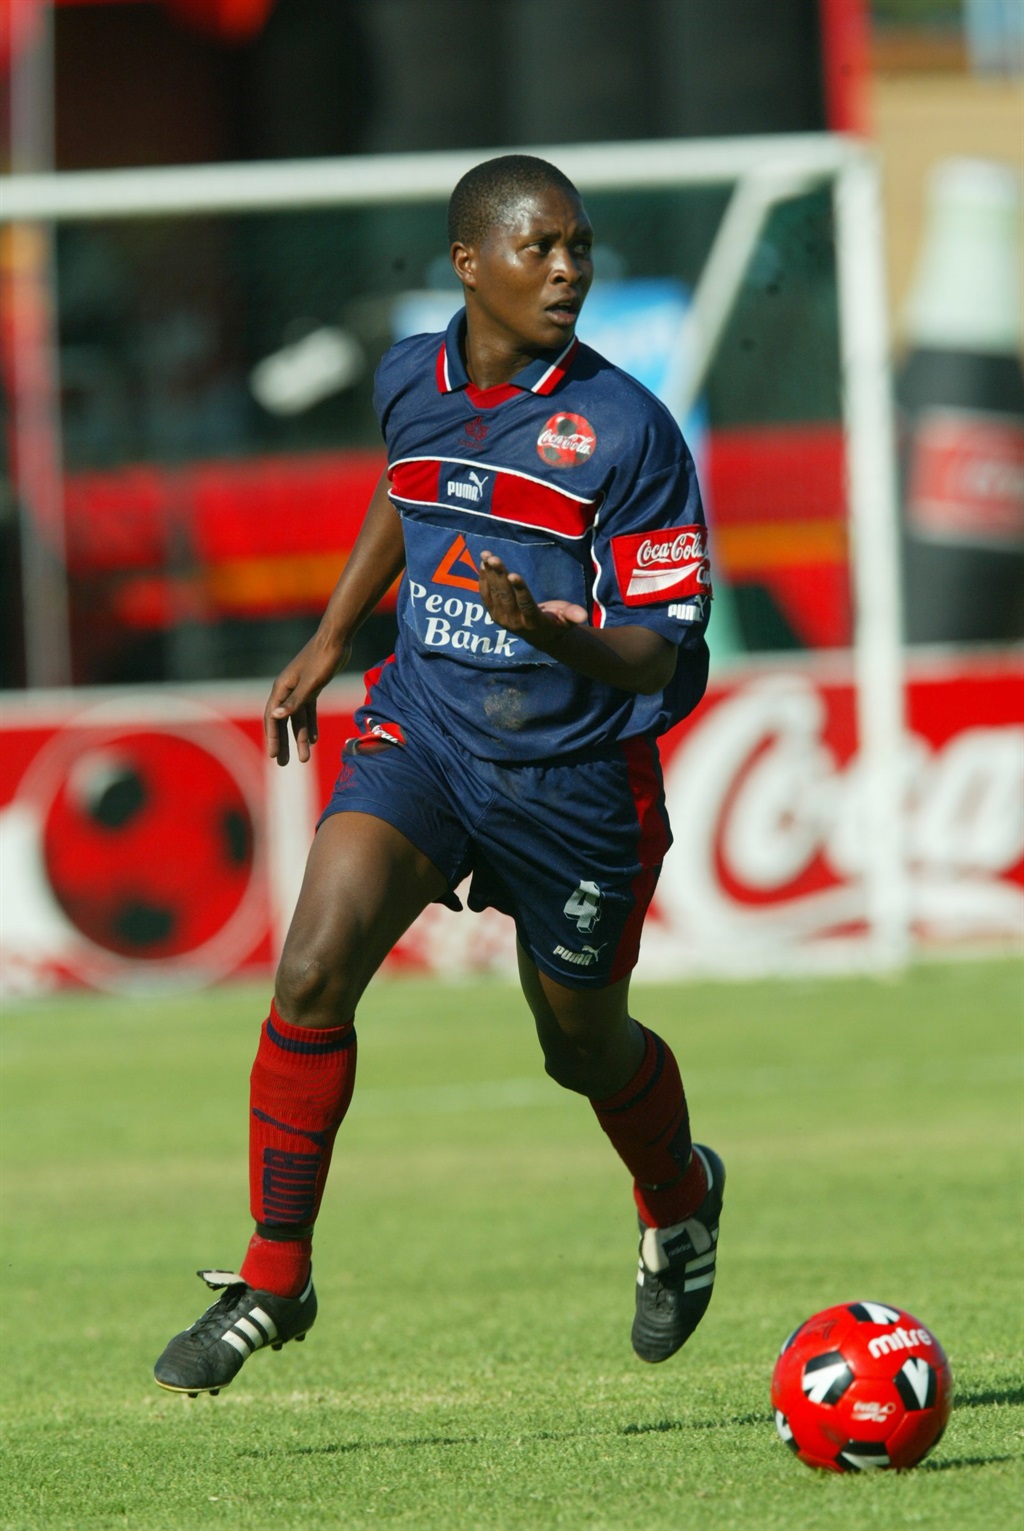 17 November 2002, Coca Cola Cup, Jomo Cosmos v Manning Rangers, Semi-Final, HM Pitjie Stadium, Pretoria, South Africa. Innocent Ntsume in action for Cosmos Photo Credit: - Gallo Images